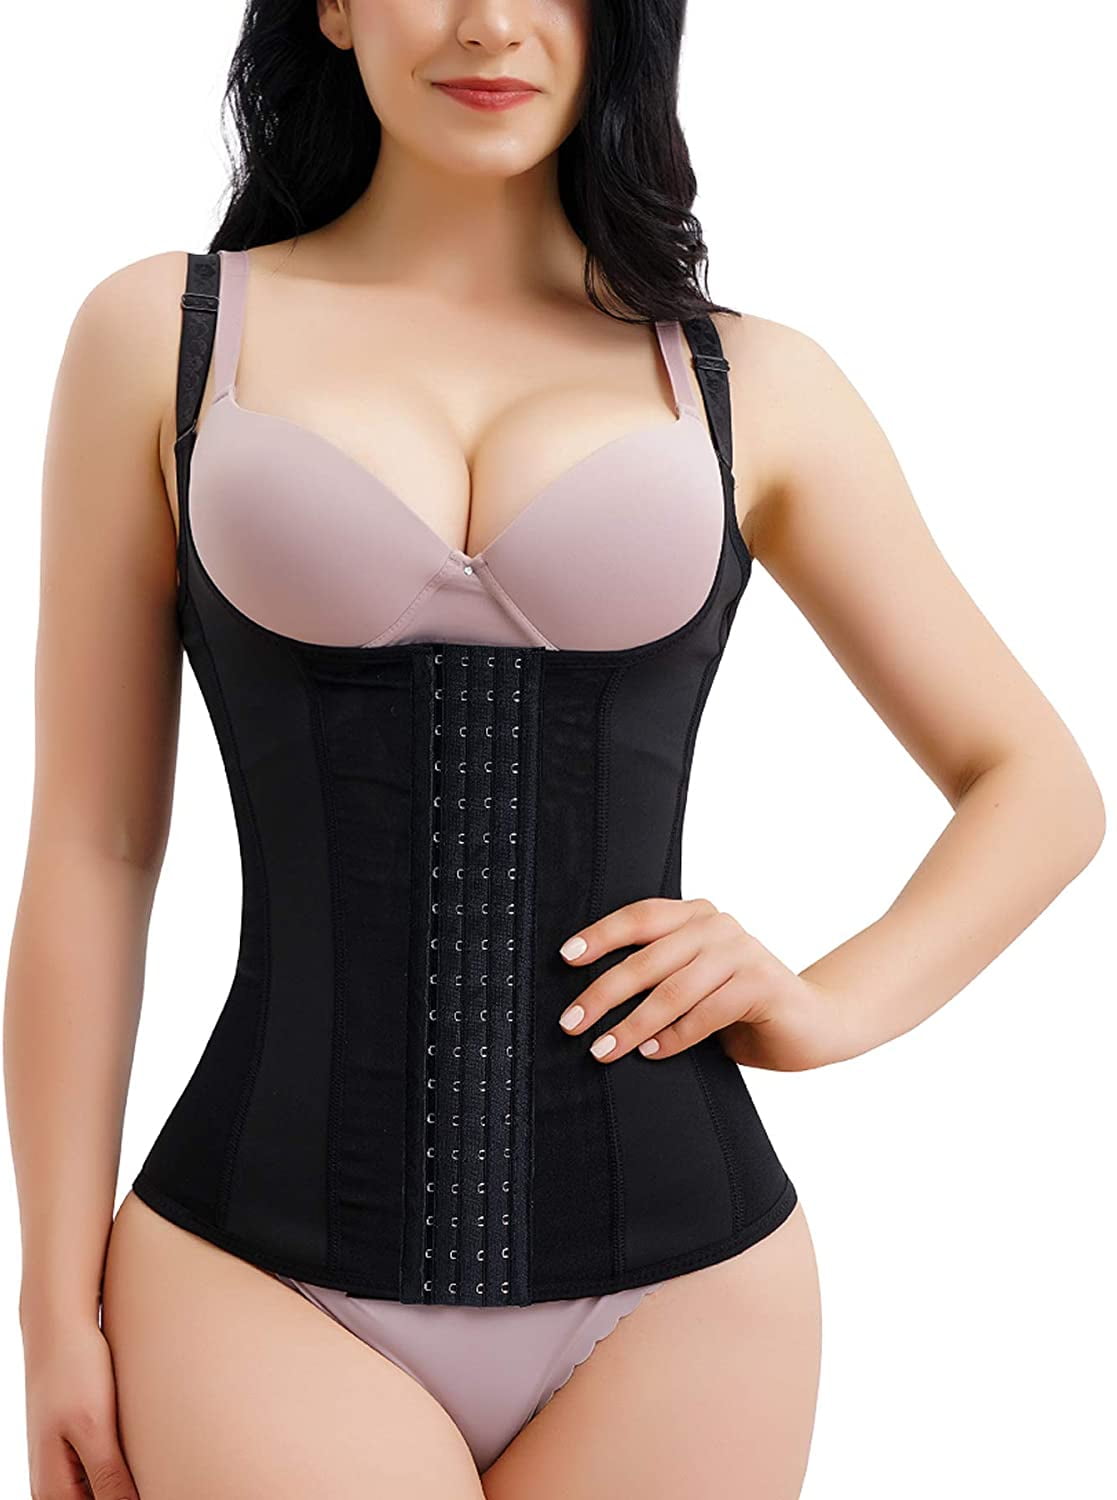 HIKARO S Waist Trainer Corset Weight Loss Trimmer Slimming Cincher Body Shaper Belts Rosy Small in Pink Womens Clothing Lingerie Corsets and bustier tops 